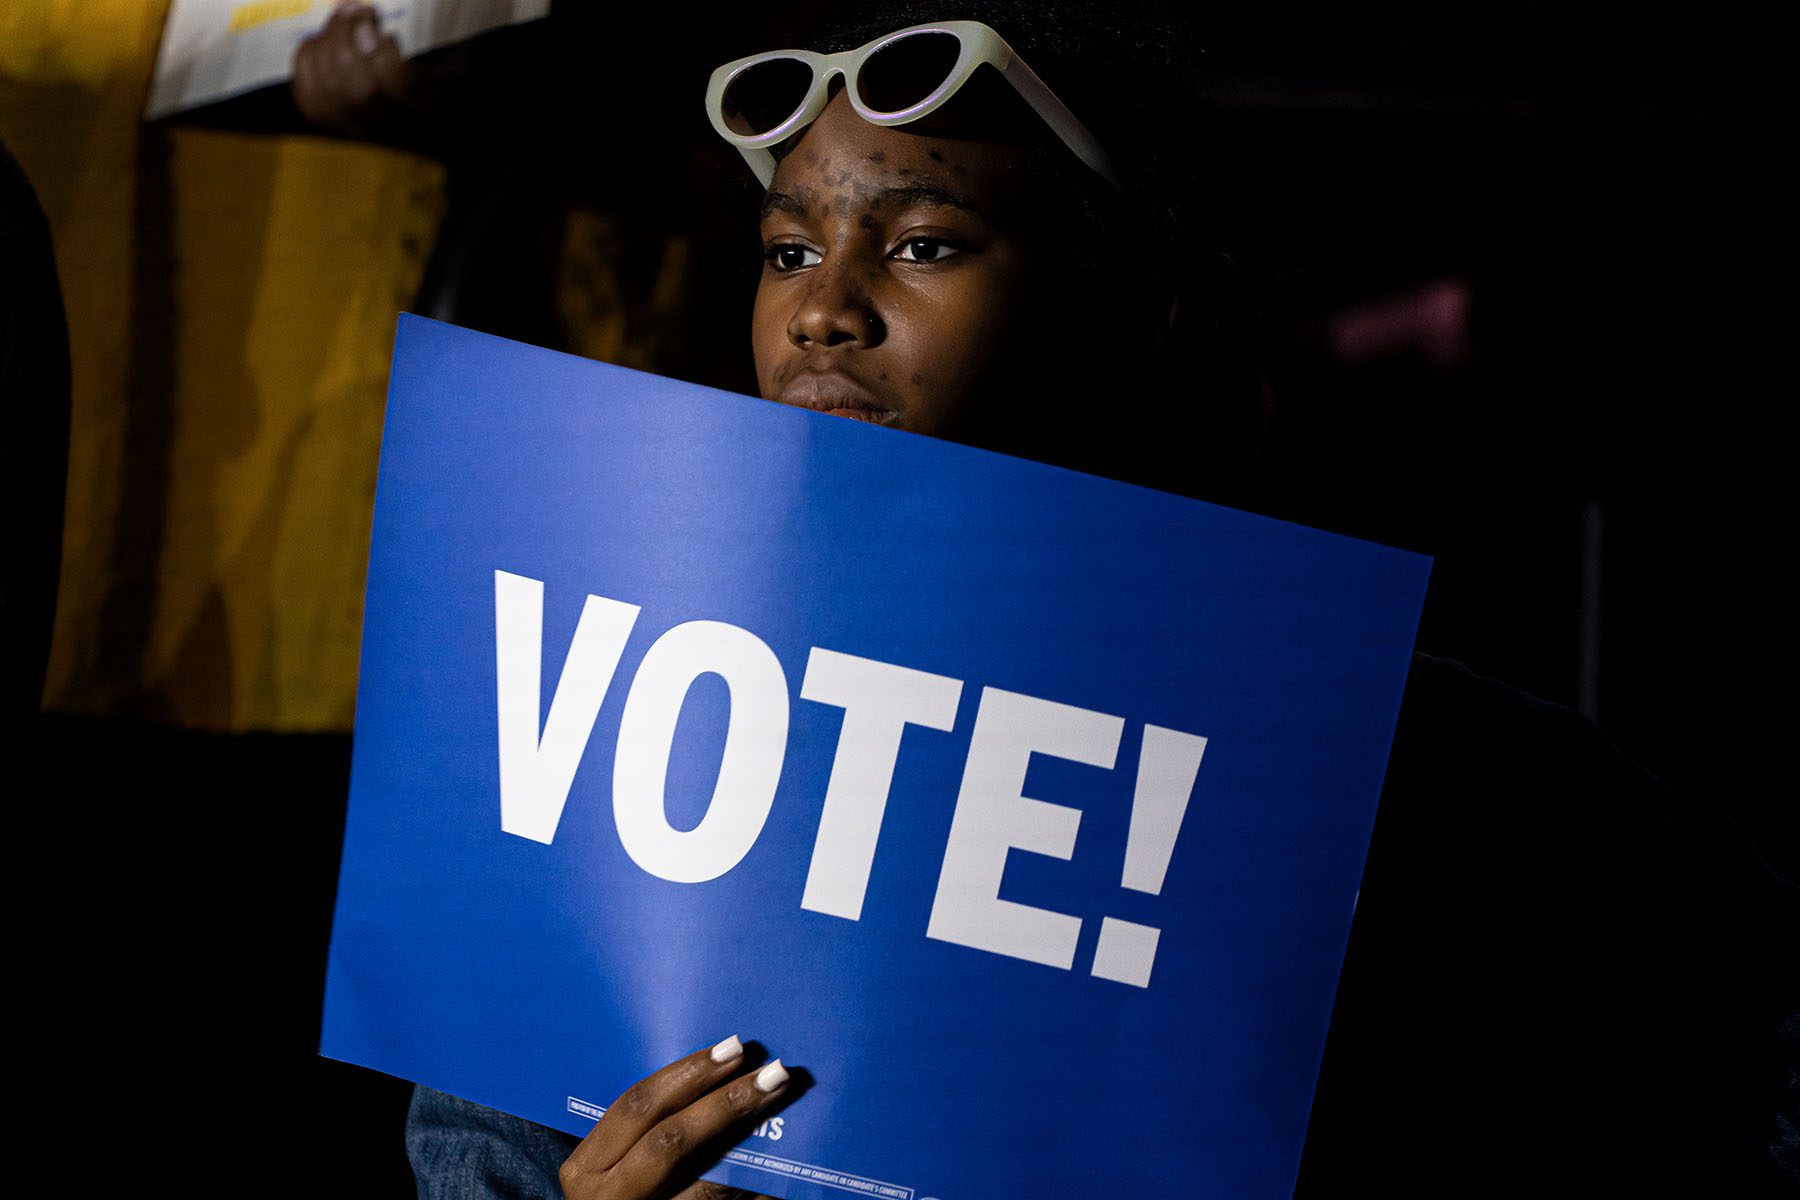 A supporter holds a blue sign that reads "vote!" at a campaign rally for Wes Moore.